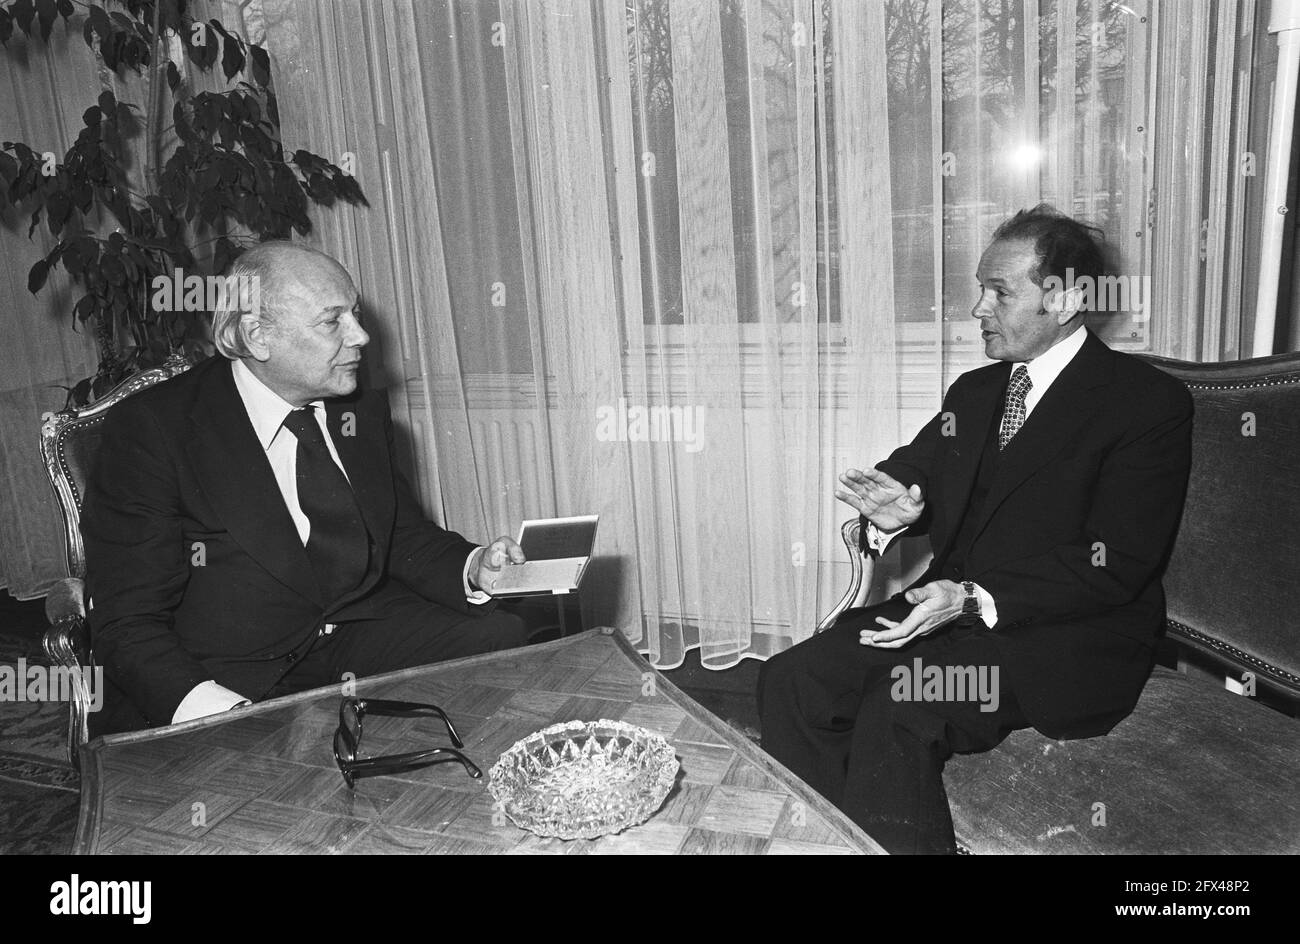 Prime Minister Den Uyl receives Foreign Minister of GDR, Oskar Fischer, Fischer (head), January 24, 1977, receipts, The Netherlands, 20th century press agency photo, news to remember, documentary, historic photography 1945-1990, visual stories, human history of the Twentieth Century, capturing moments in time Stock Photo